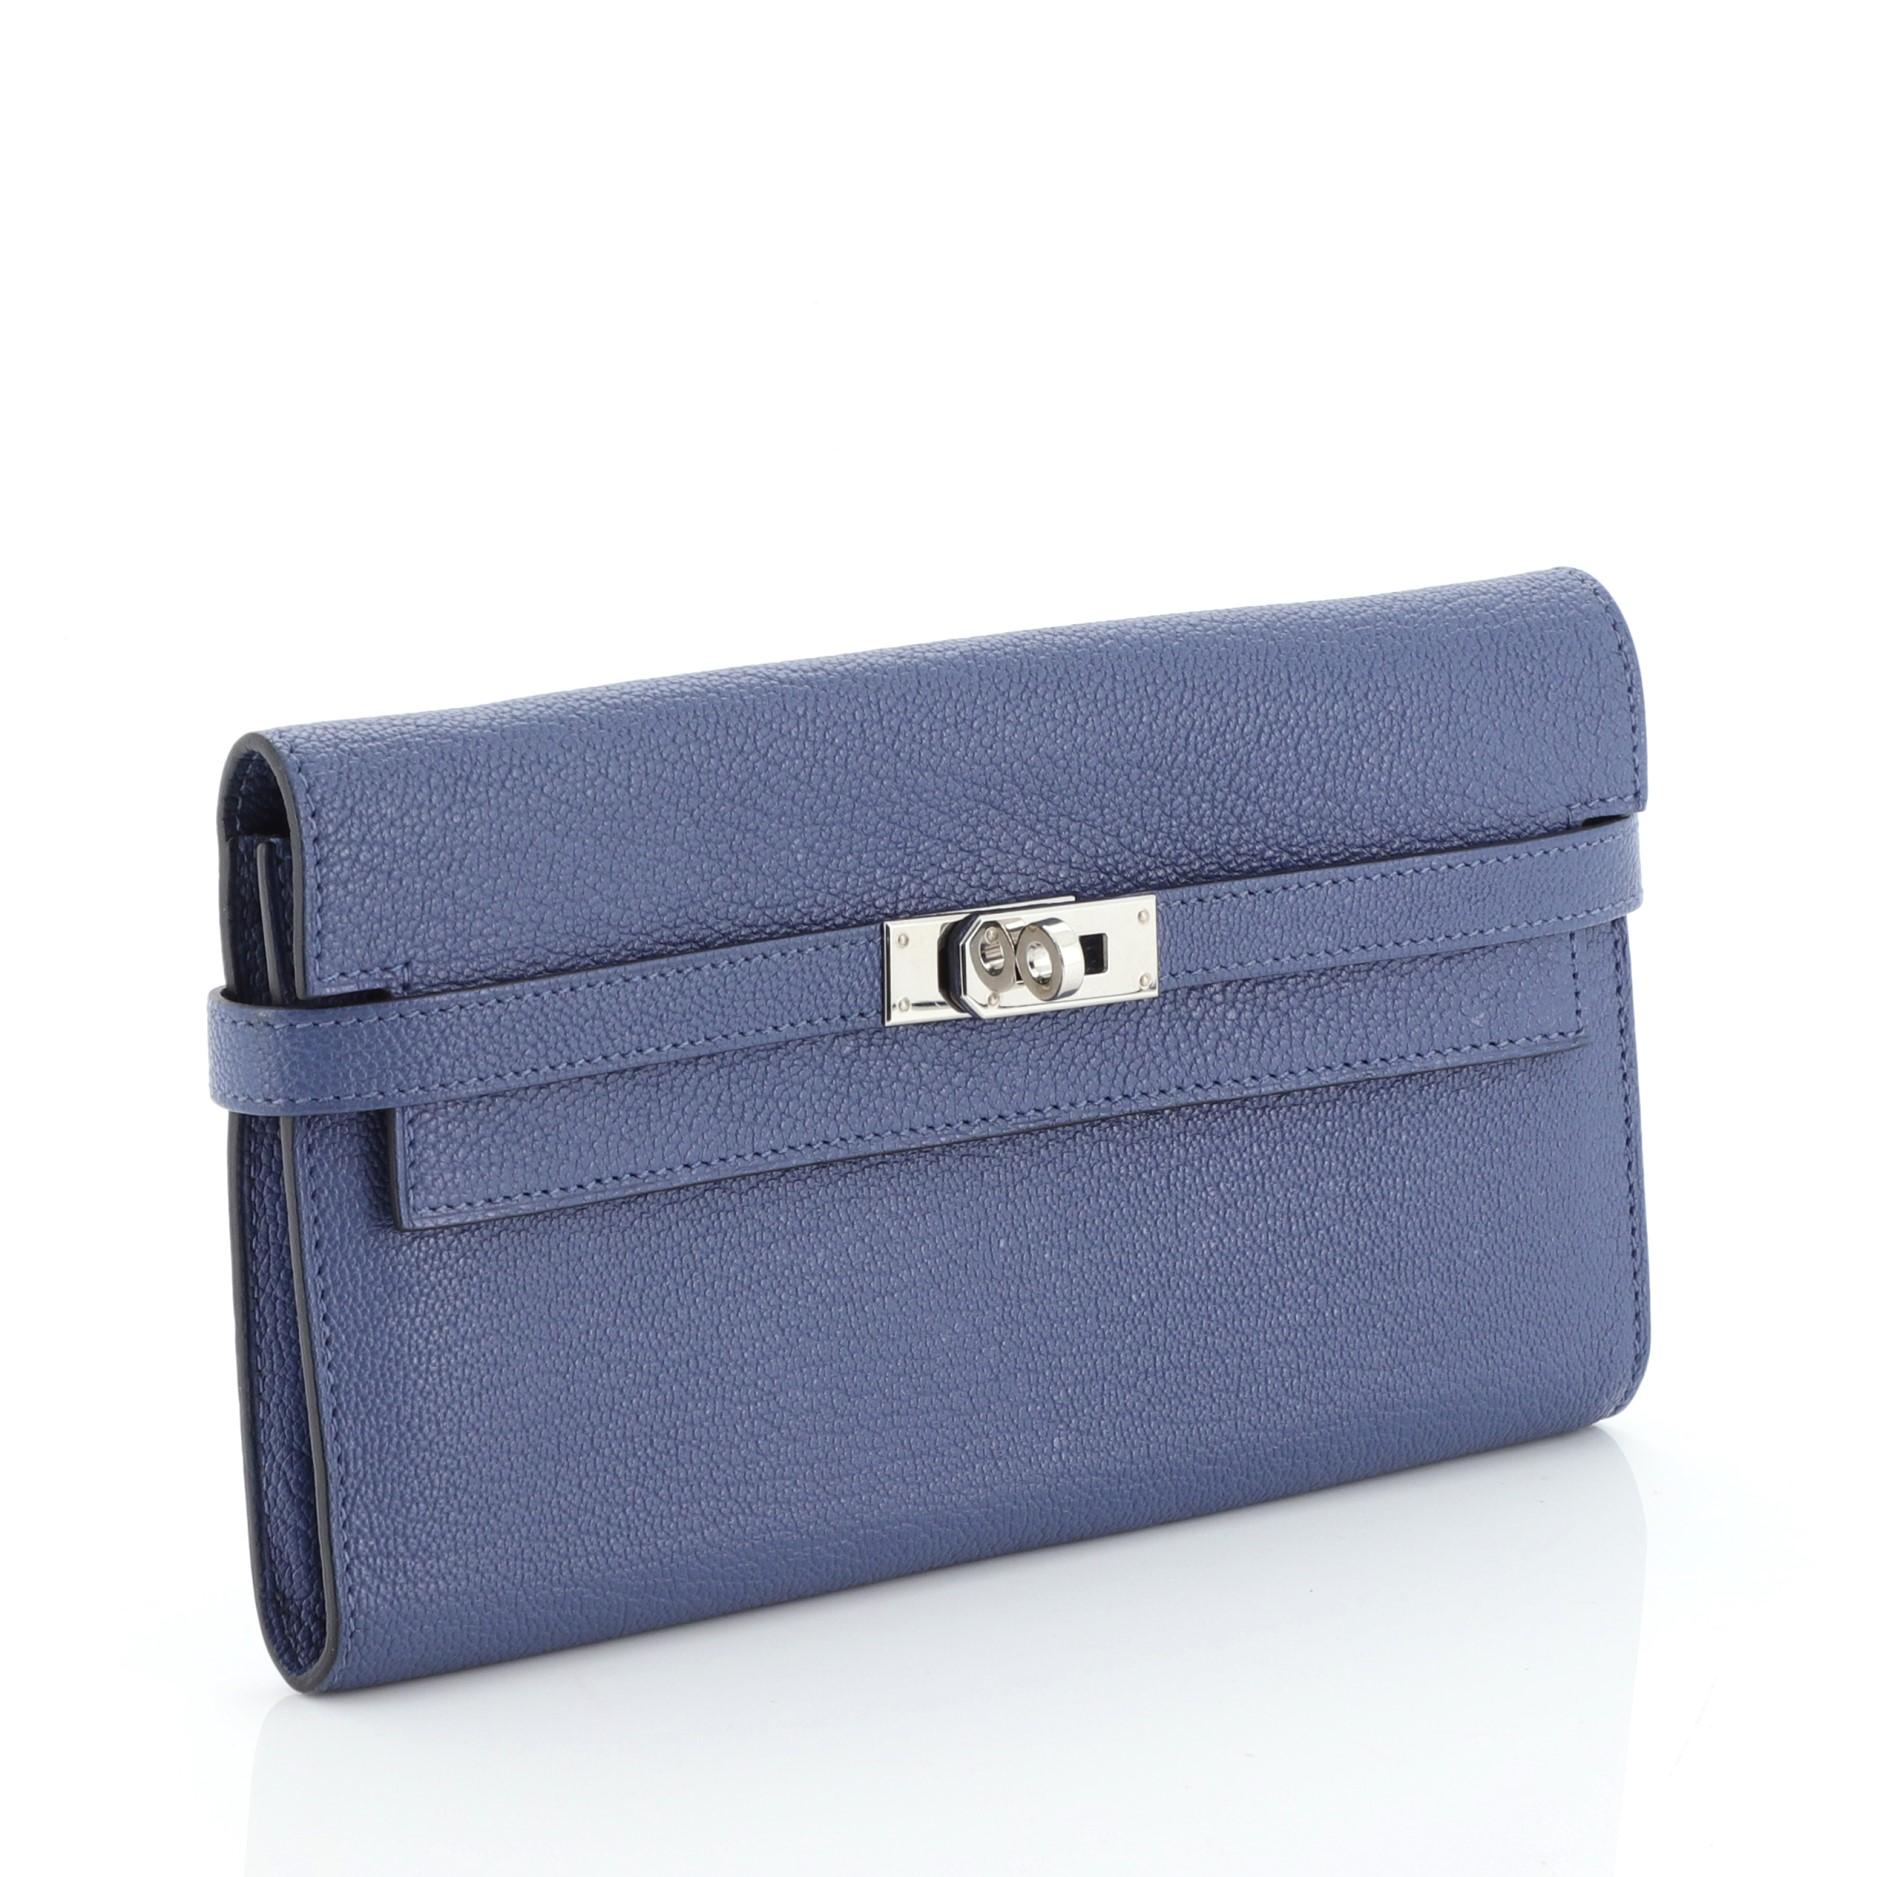 This Hermes Kelly Wallet Chevre Mysore Long, crafted in Bleu Brighton blue Chevre Mysore leather, features palladium hardware. Its turn-lock closure opens to a Bleu Brighton blue Chevre leather interior with middle zip compartment, slip pocket and